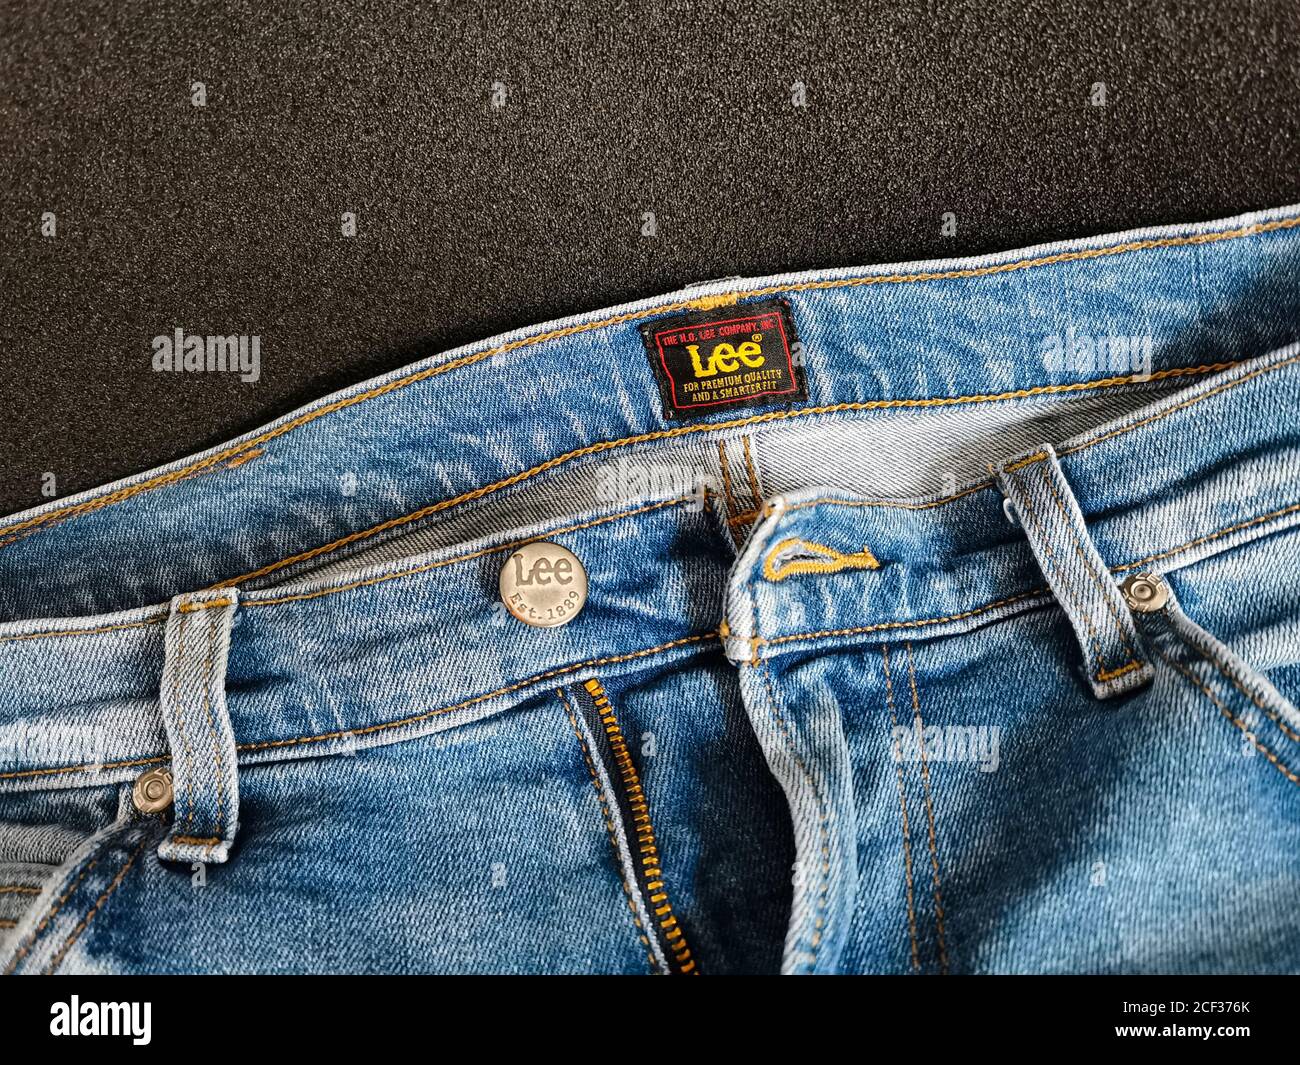 Lee american brand jeans. Close up of the Lee button on a blue men's ...